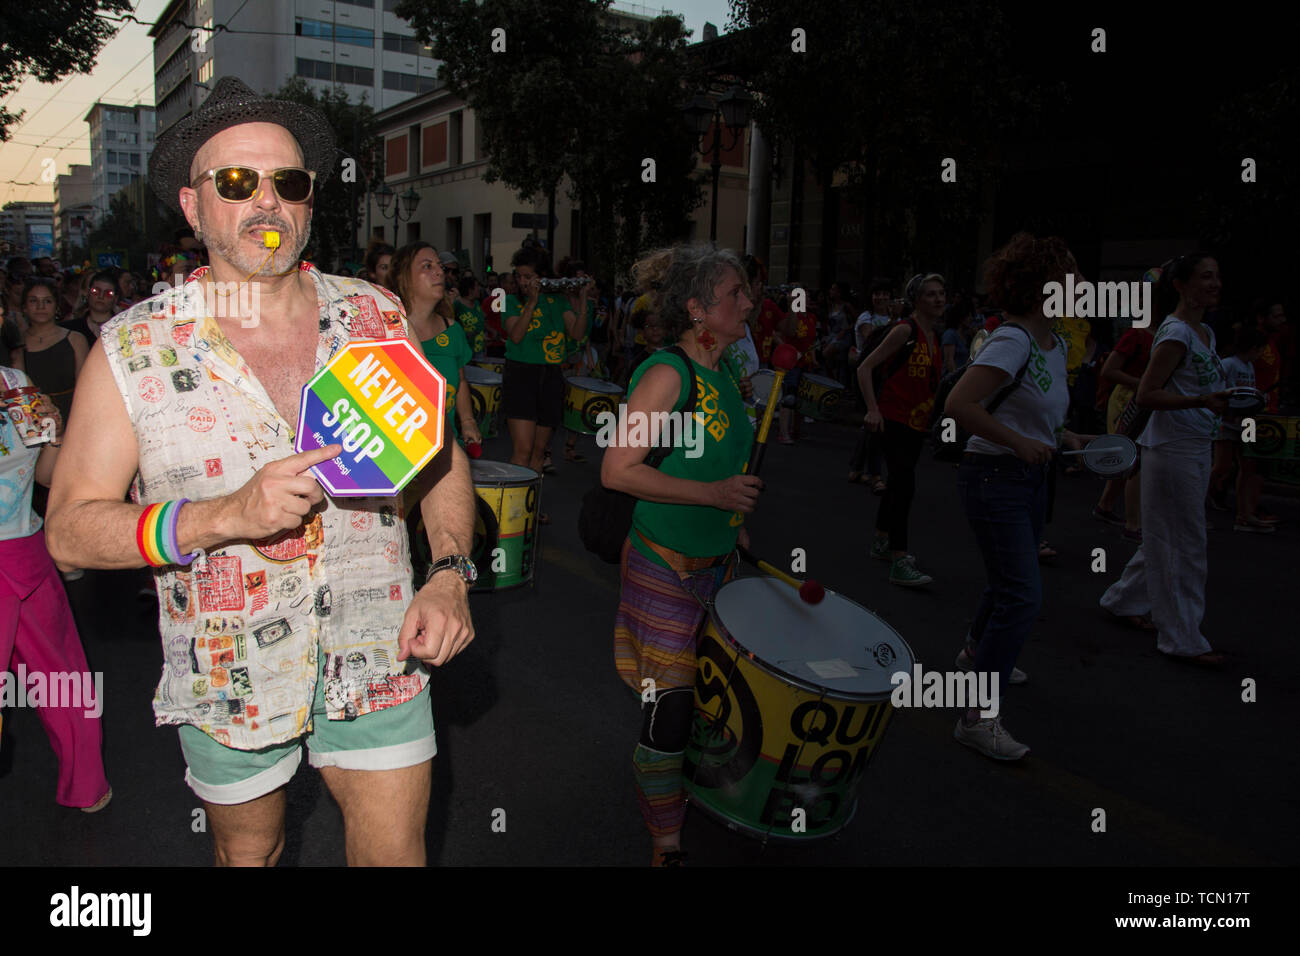 Athens, Greece. 8th June 2019. People march dancing, waving rainbow flags and holding placards during the Athens Pride 2019 parade. Thousands joined the Athens Pride annual event which was this year dedicated to Zak Kostopoulos, the LGBTQ activist who was beaten to death in broad daylight back in September 2018. Credit: Nikolas Georgiou/Alamy Live News Stock Photo